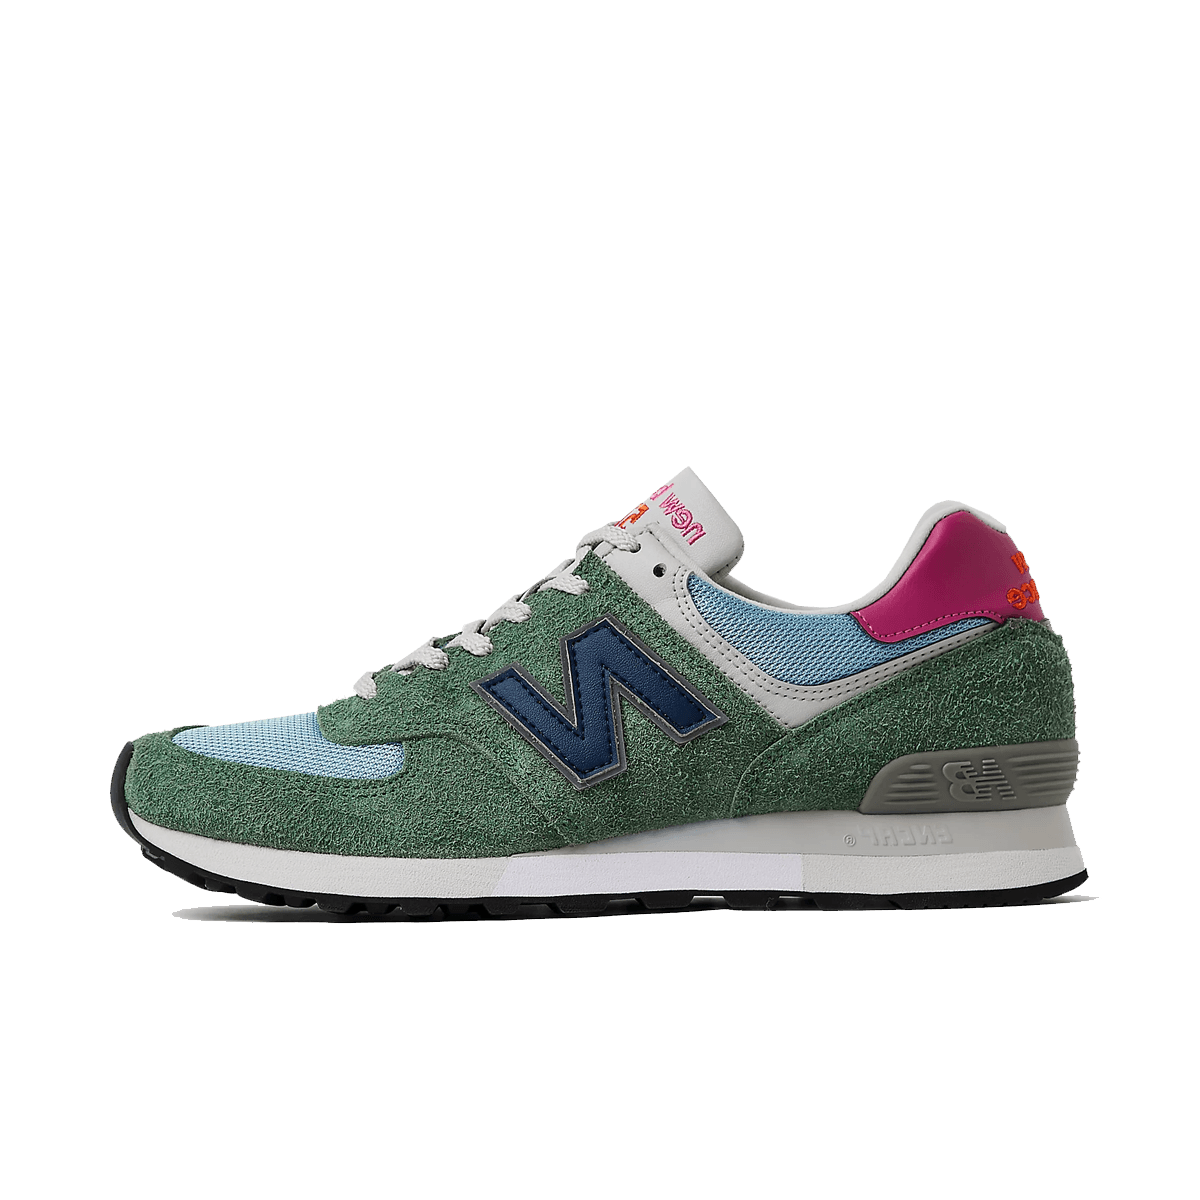 New Balance 576 'Green' - Made in UK OU576GBP